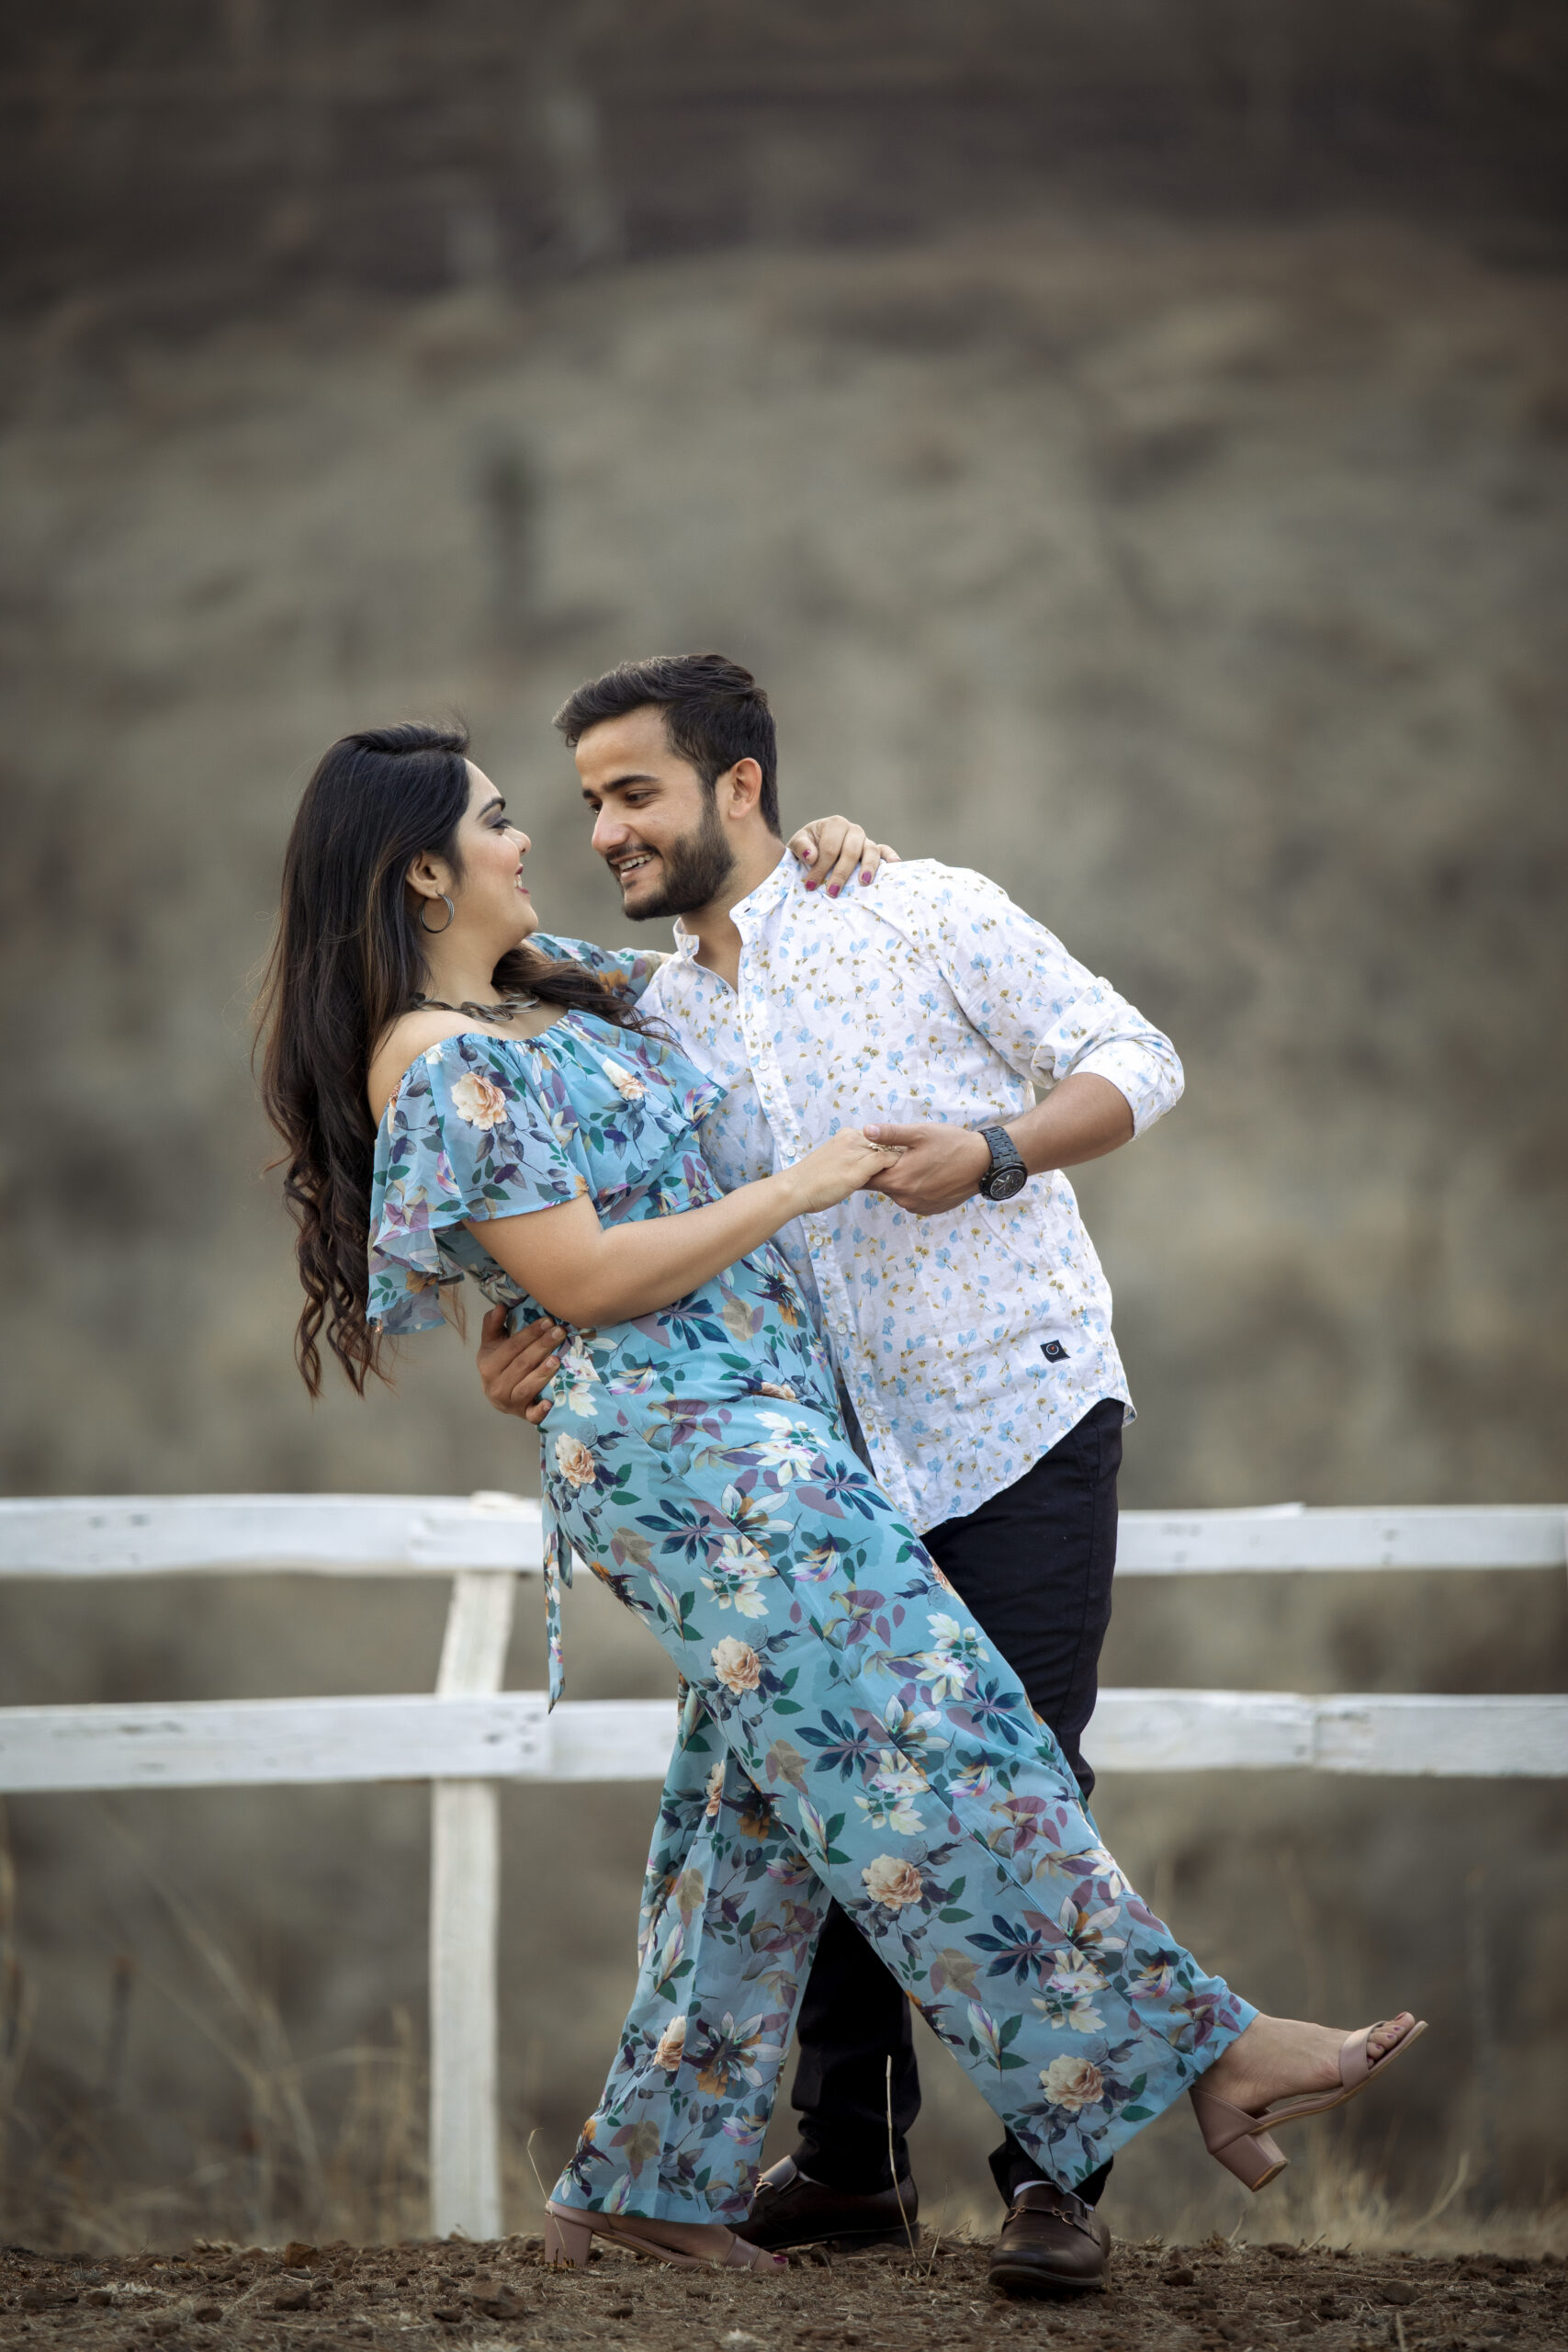 Top 25 Best Wedding Photography Poses for Couple | The Wed Cafe